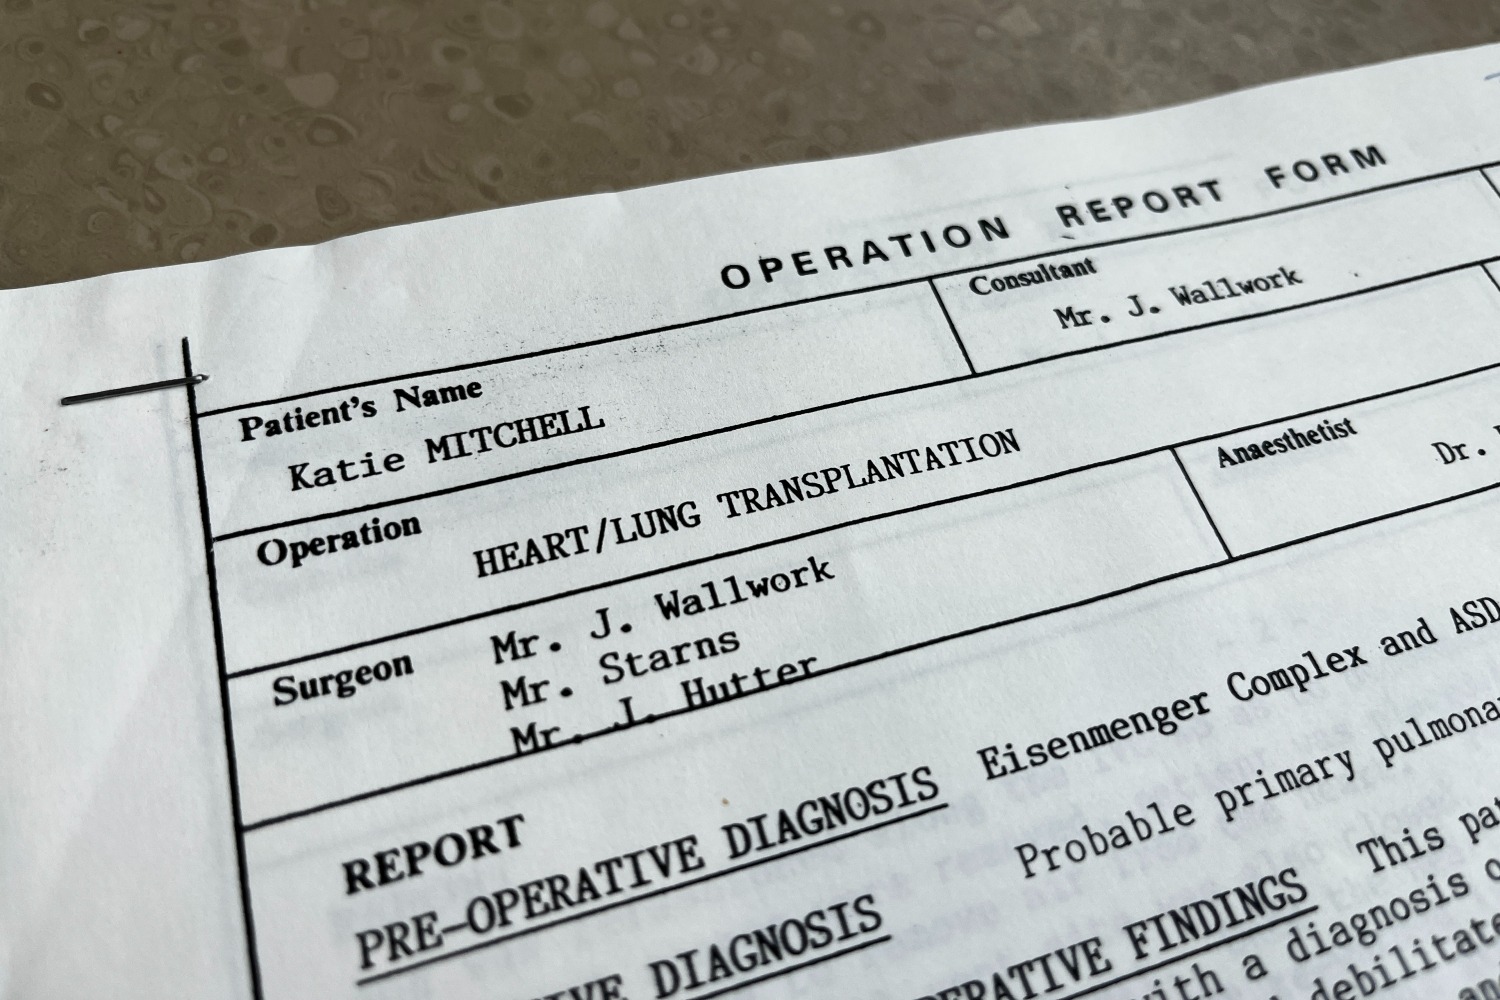 A bit of paper saying 'Operation Report Form' in typewriter font